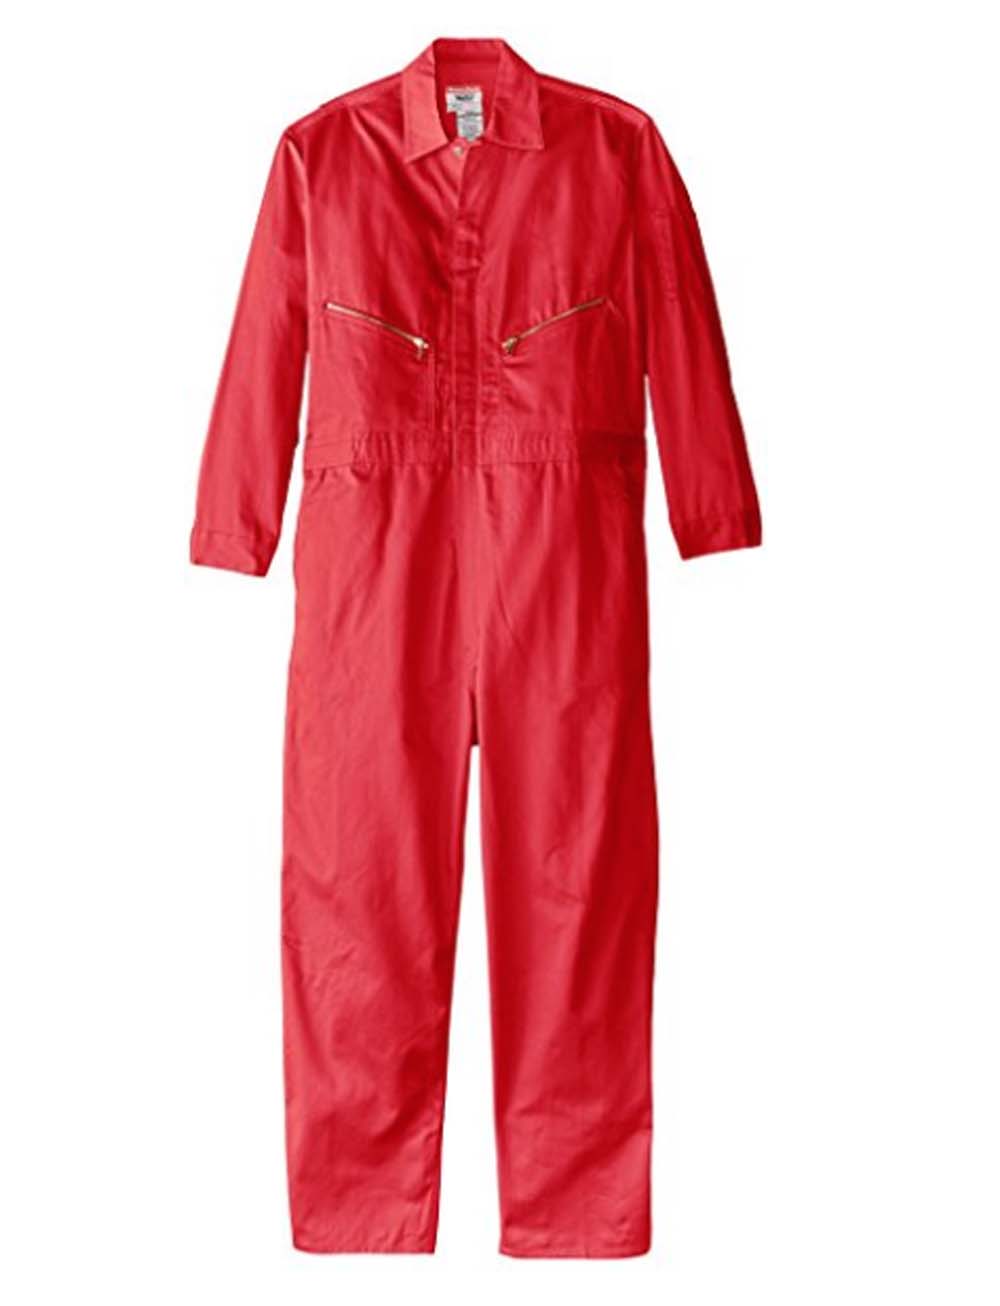 Walls Mens Safety Red 50 Regular Long Sleeve Twill Coverall - image 1 of 2